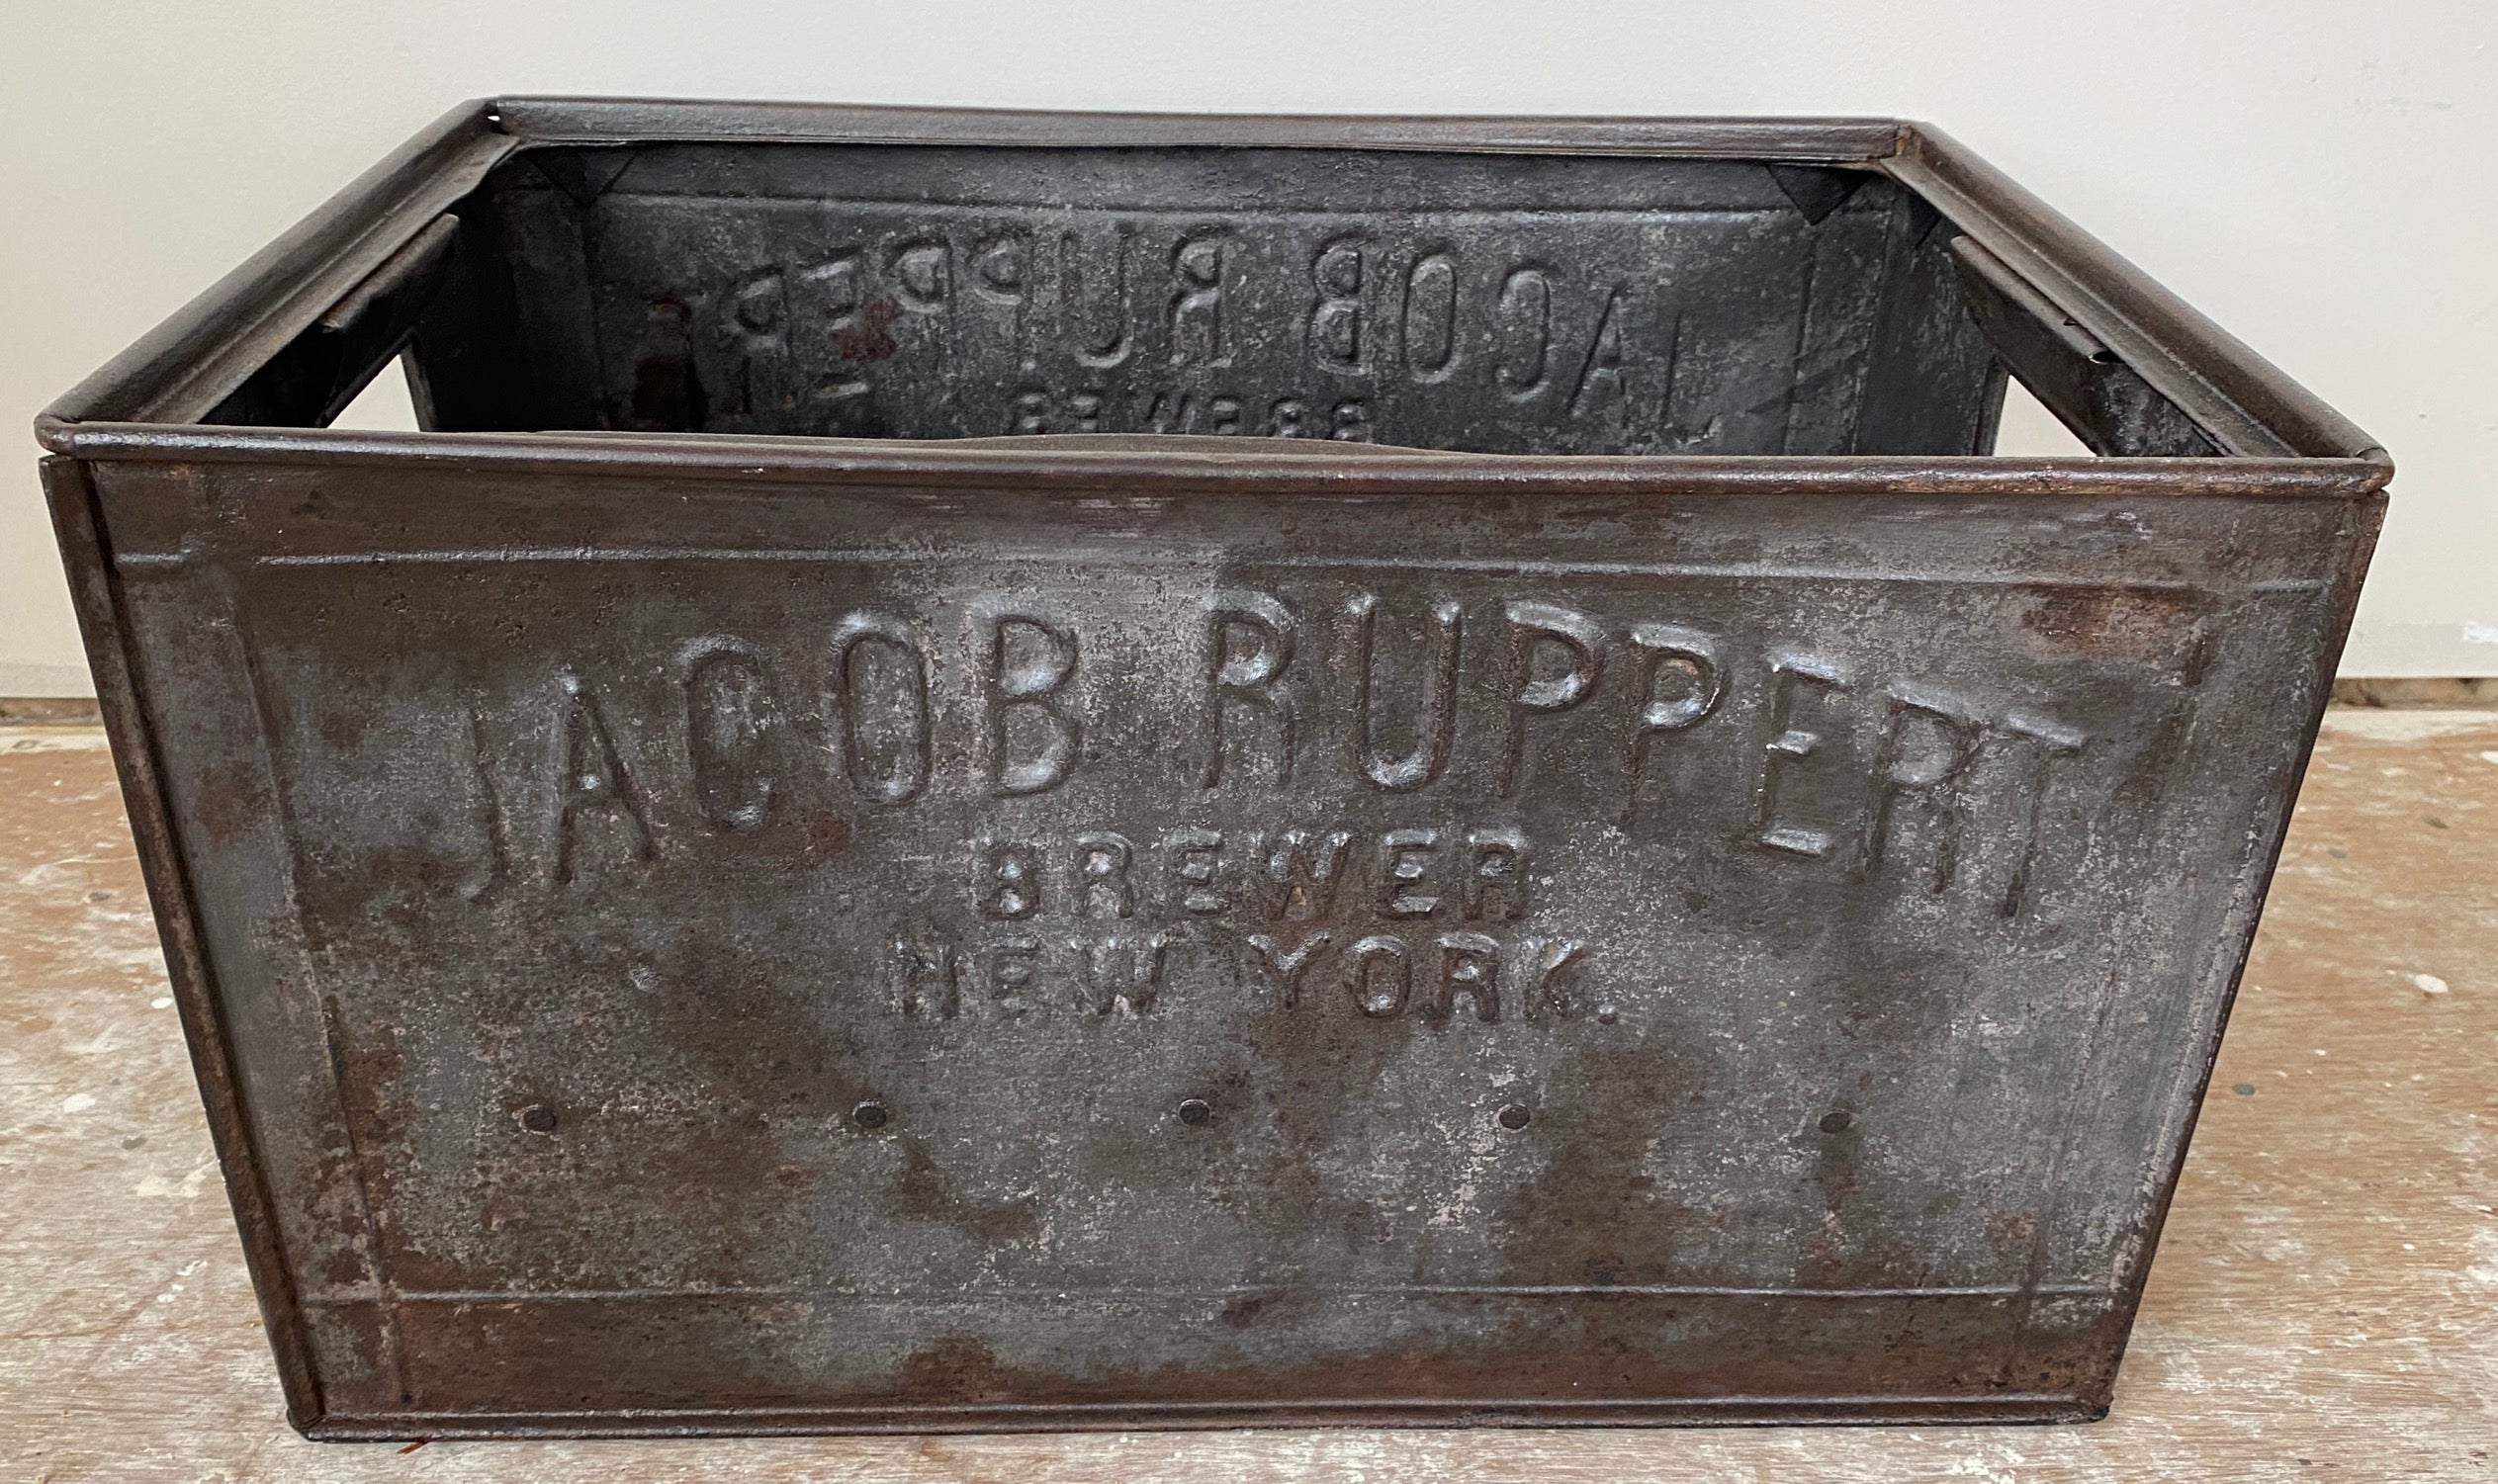 Own a bit of history.! This bottle carrier dated 1918 is probably one of the earliest still in existence. Ruppert opened a two million barrel brewery in upper Manhattan in 1913. The $30 million brewery employed 1,000 workers. The particular carrier